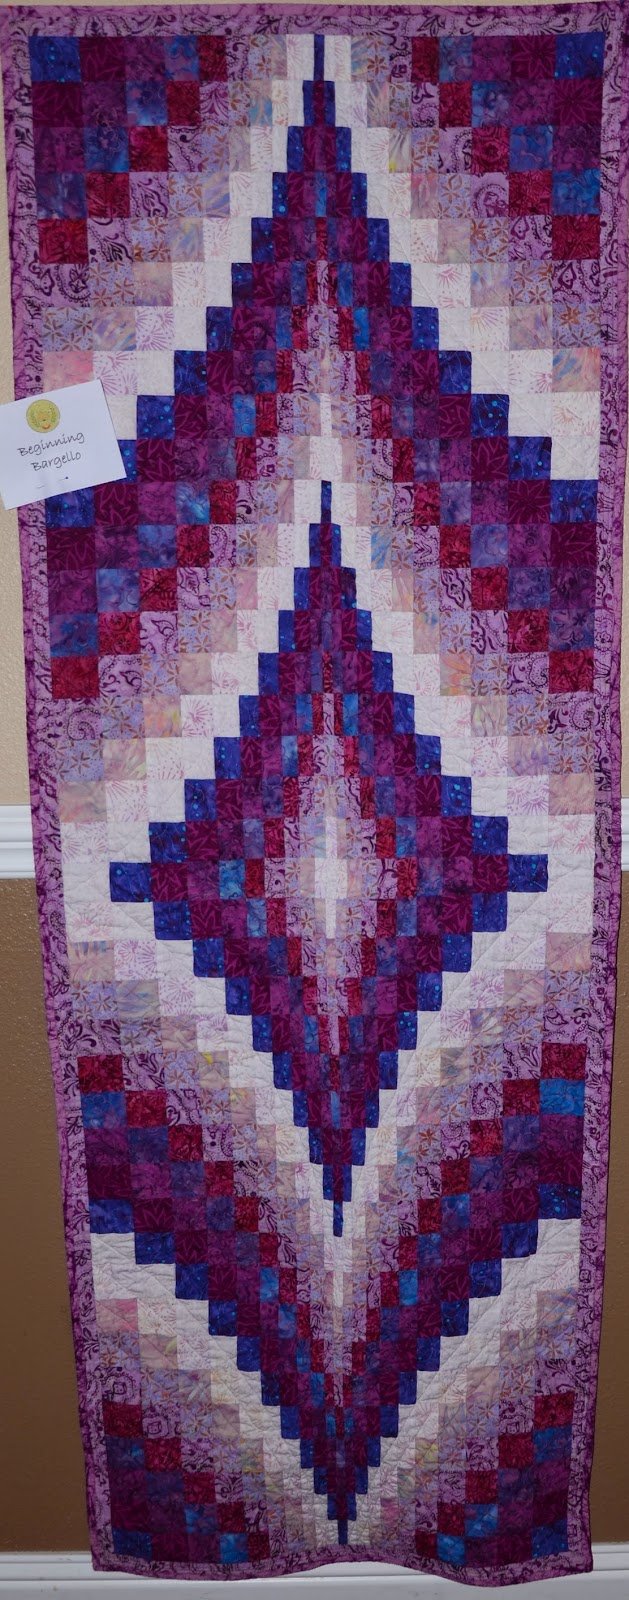 Fire Within Bargello wall hanging or table topper - Make your own kit!